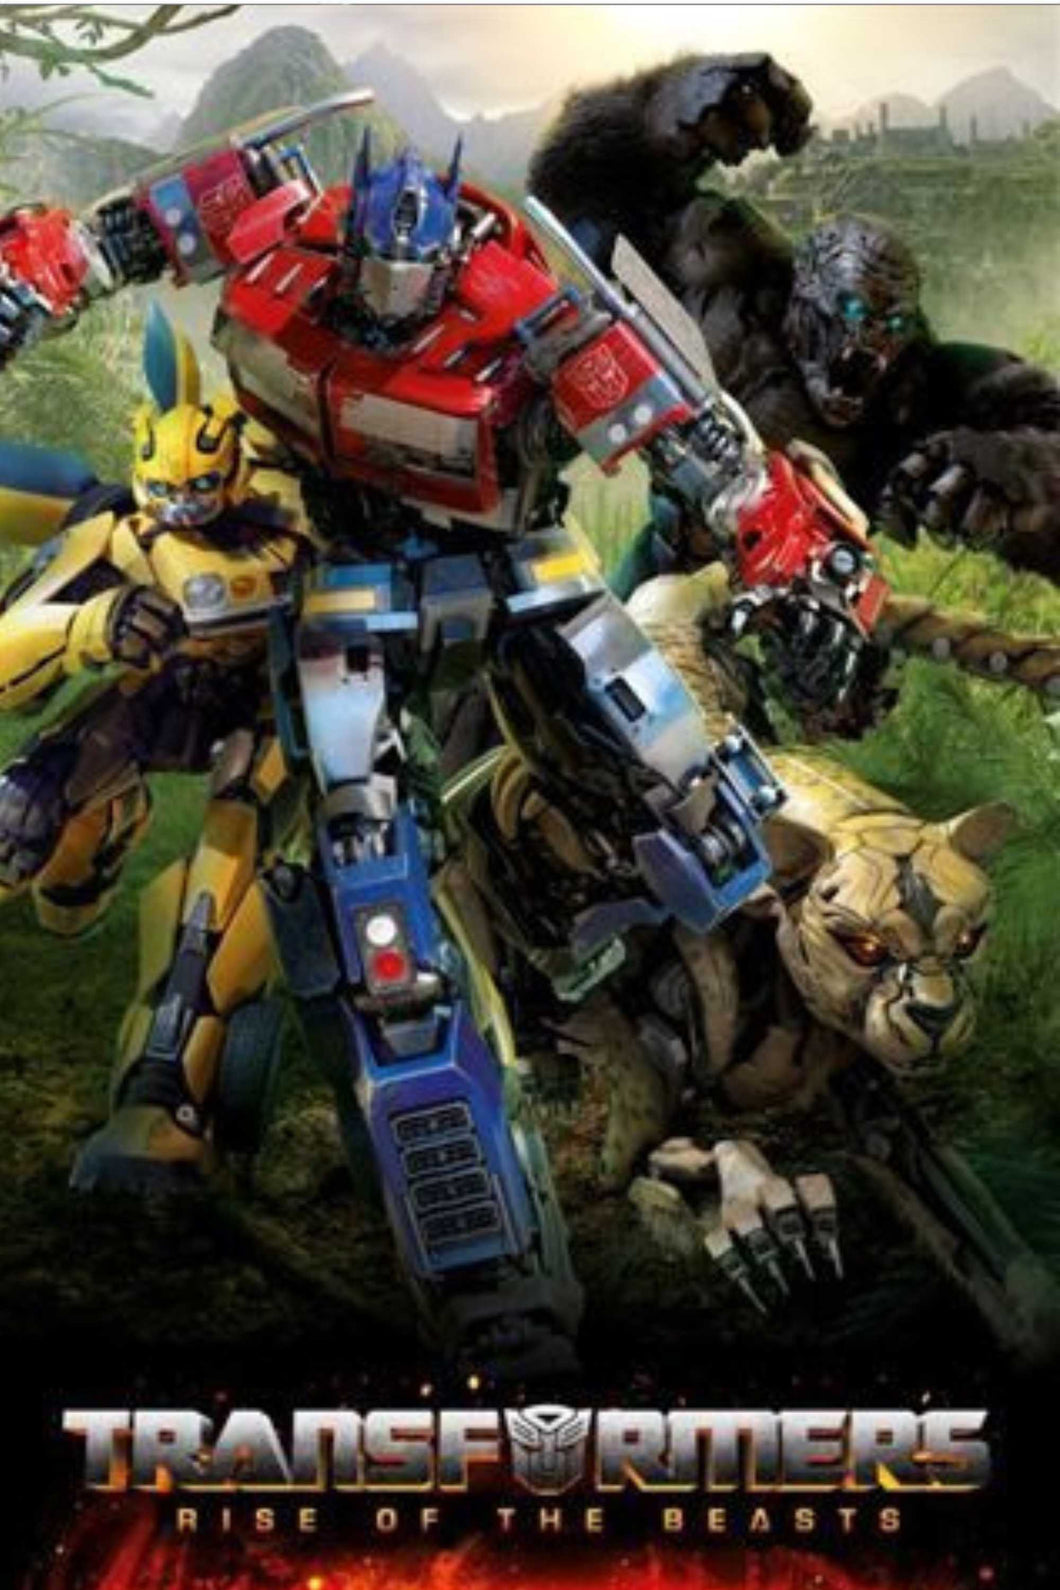 Transformers - The Rise of the Beasts Poster - egoamo posters